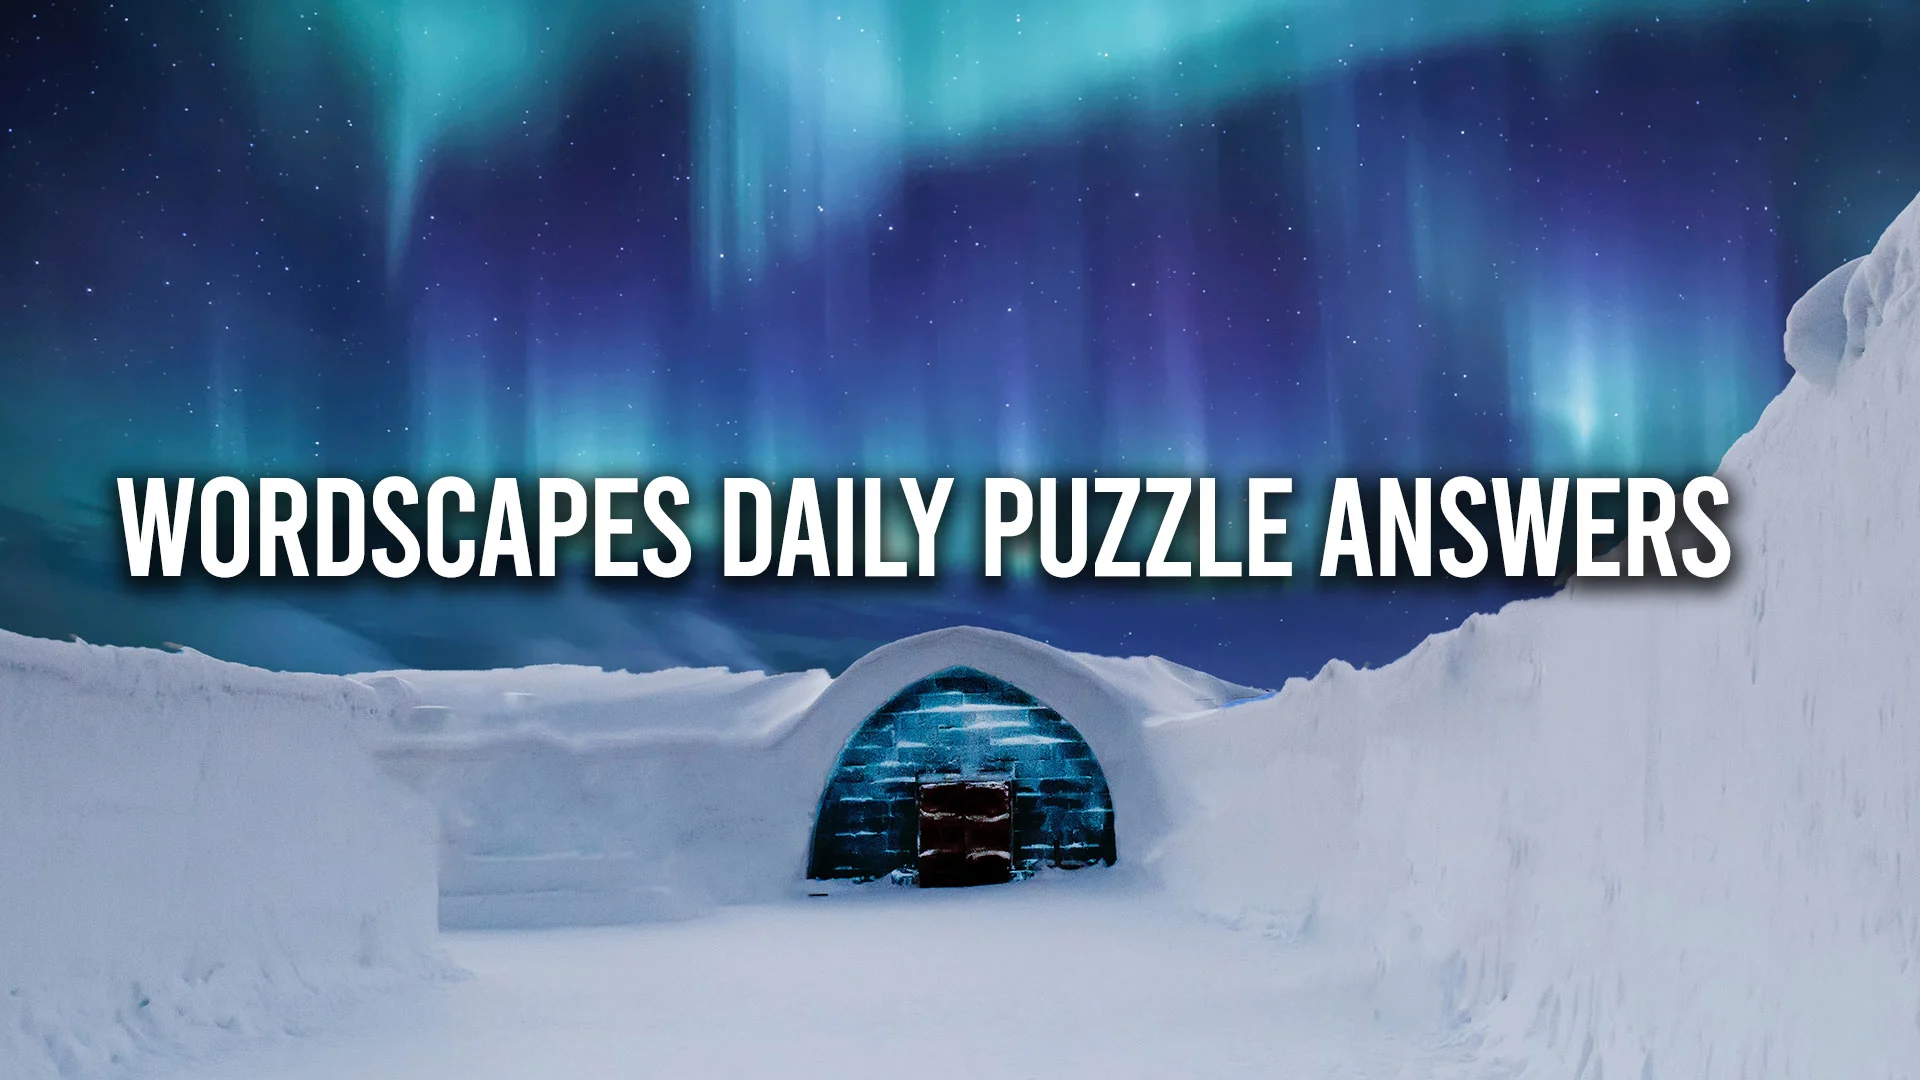 Wordscapes Daily Puzzle Answers for January 31 2023